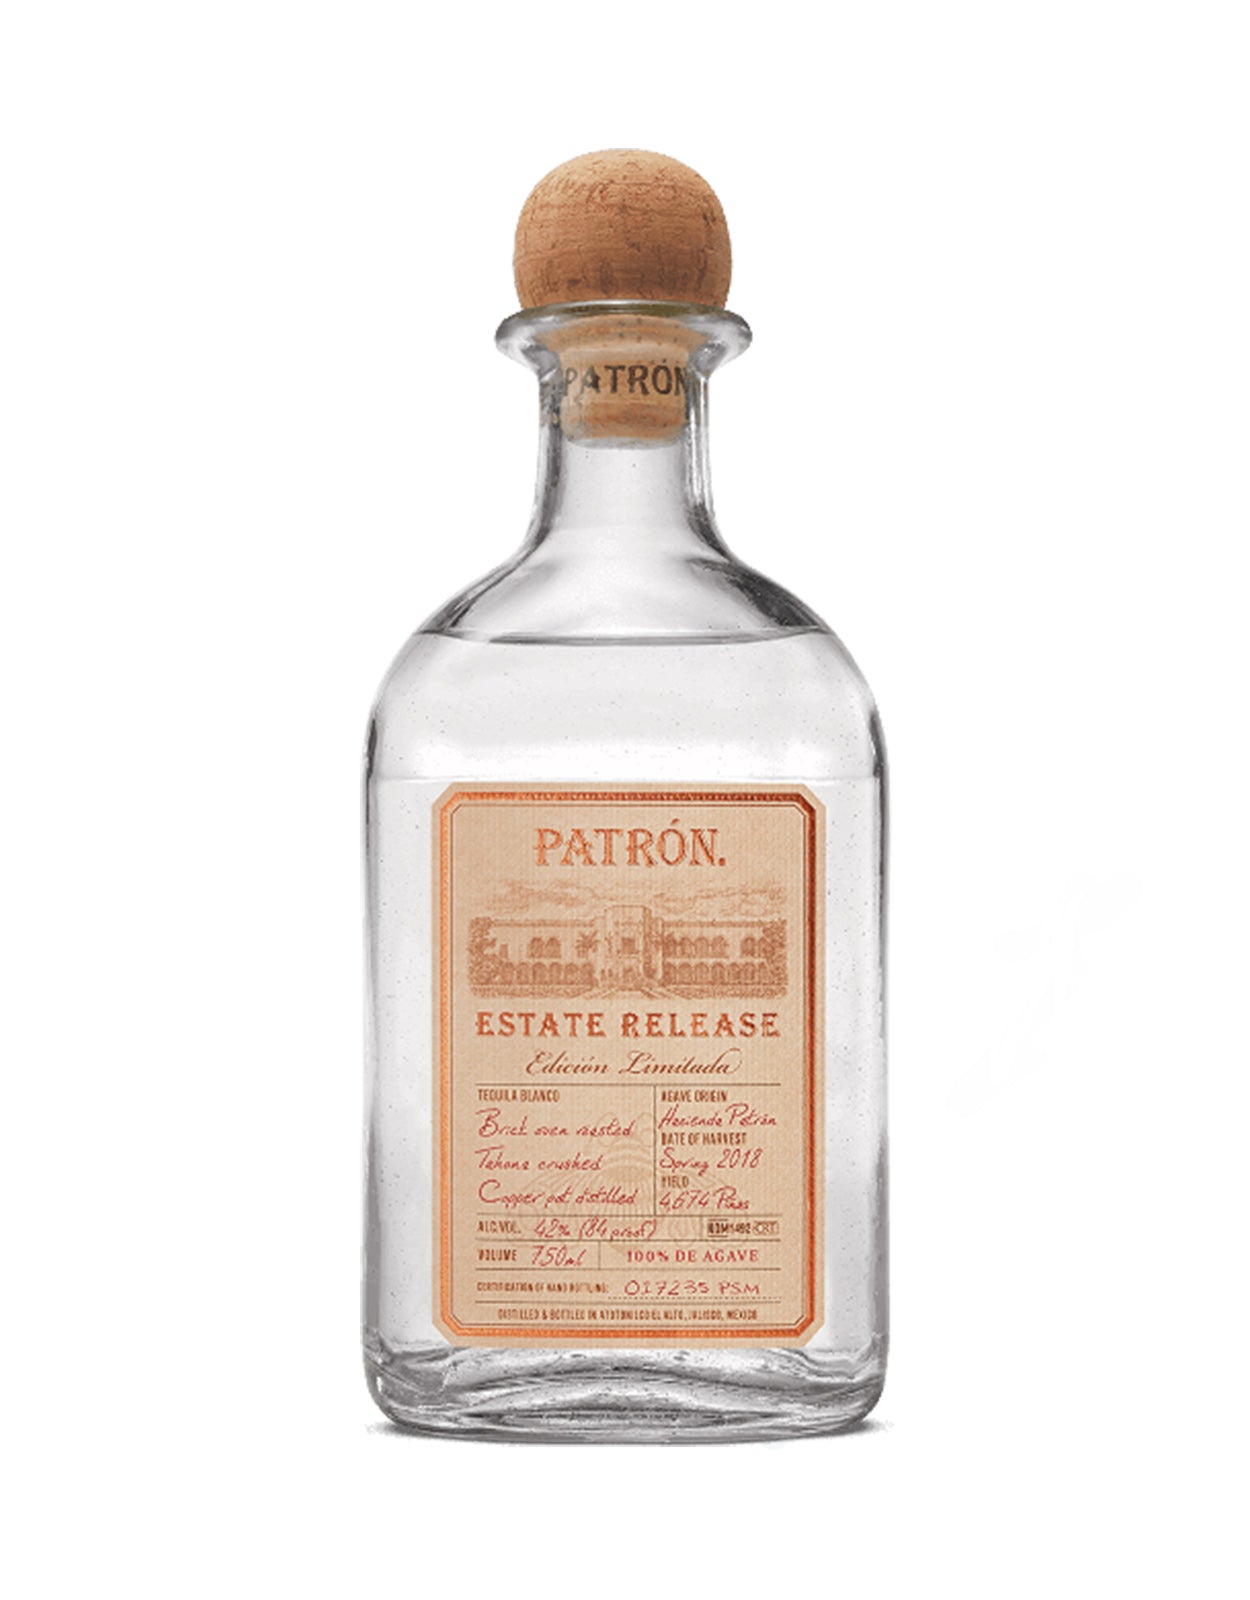 Patron Estate Release Limited Edition Silver Tequila